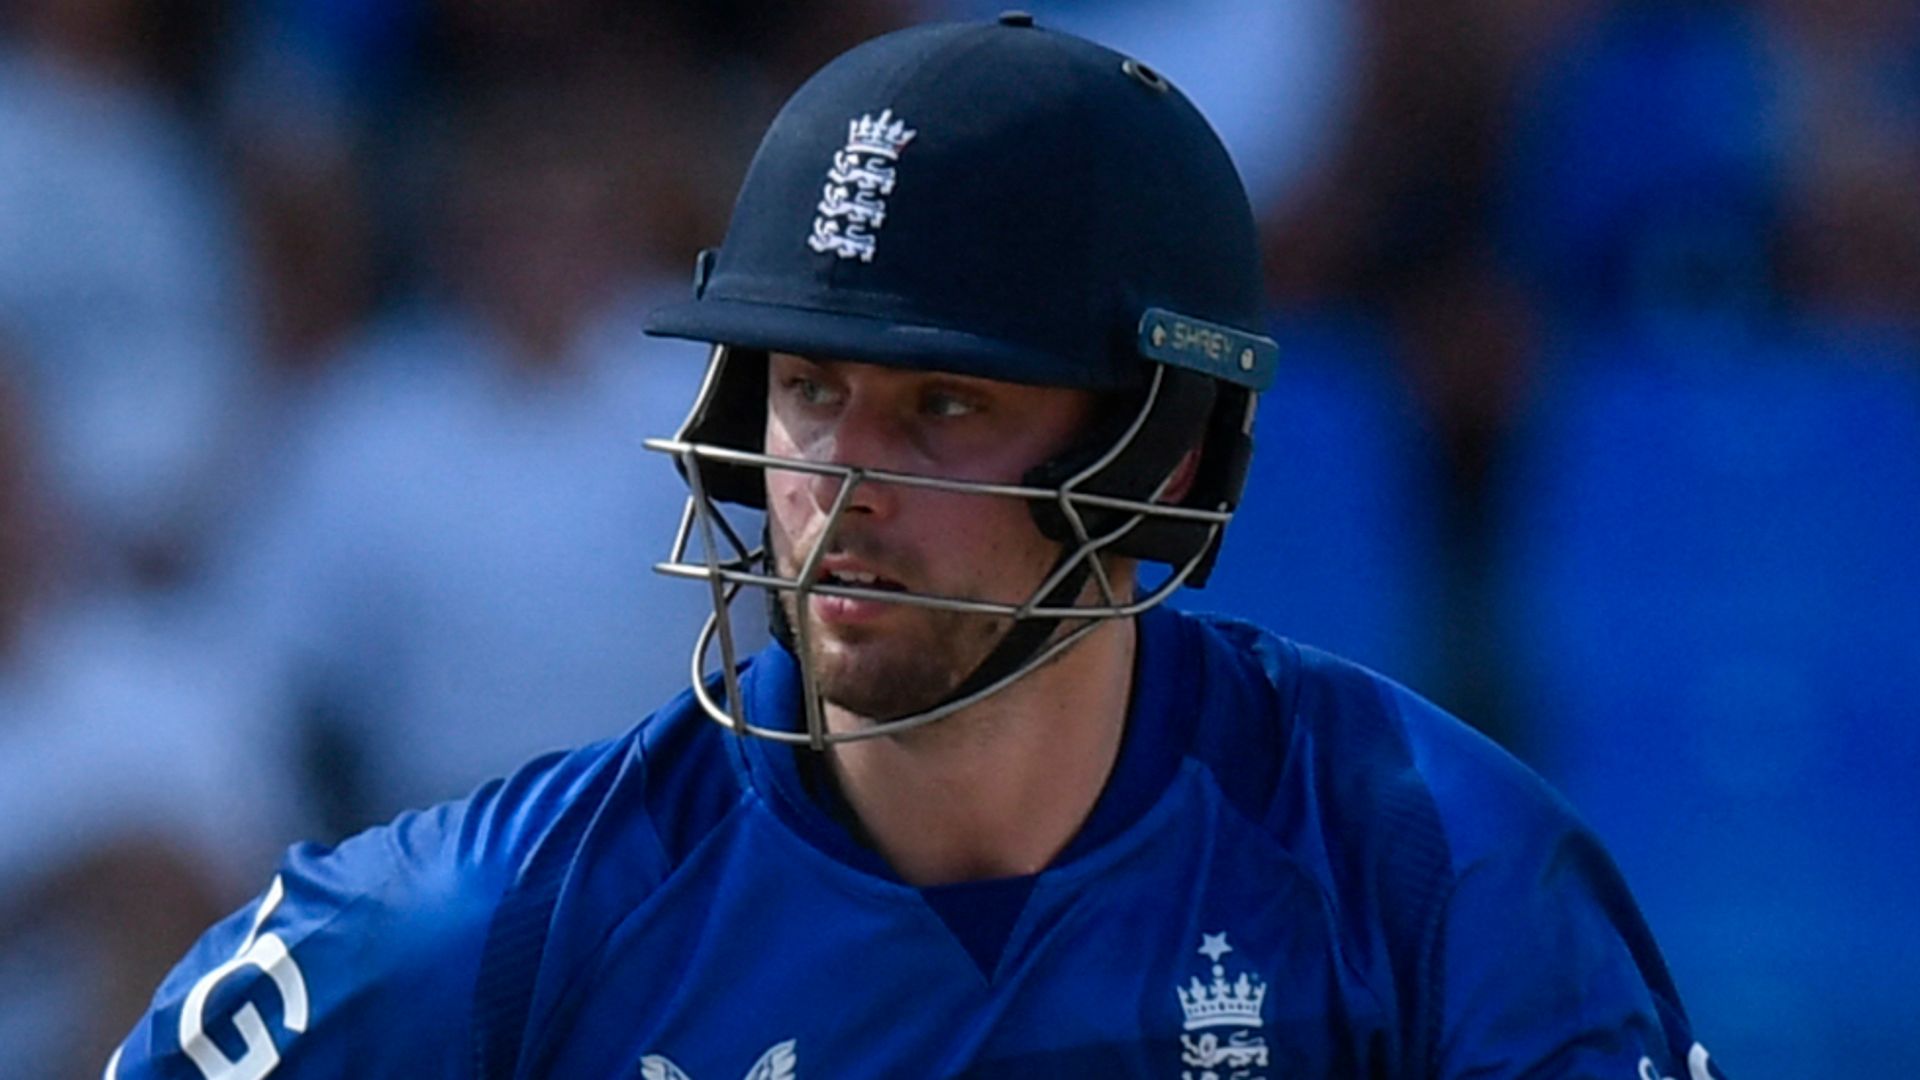 England beat West Indies by six wickets in second ODI - as it happened